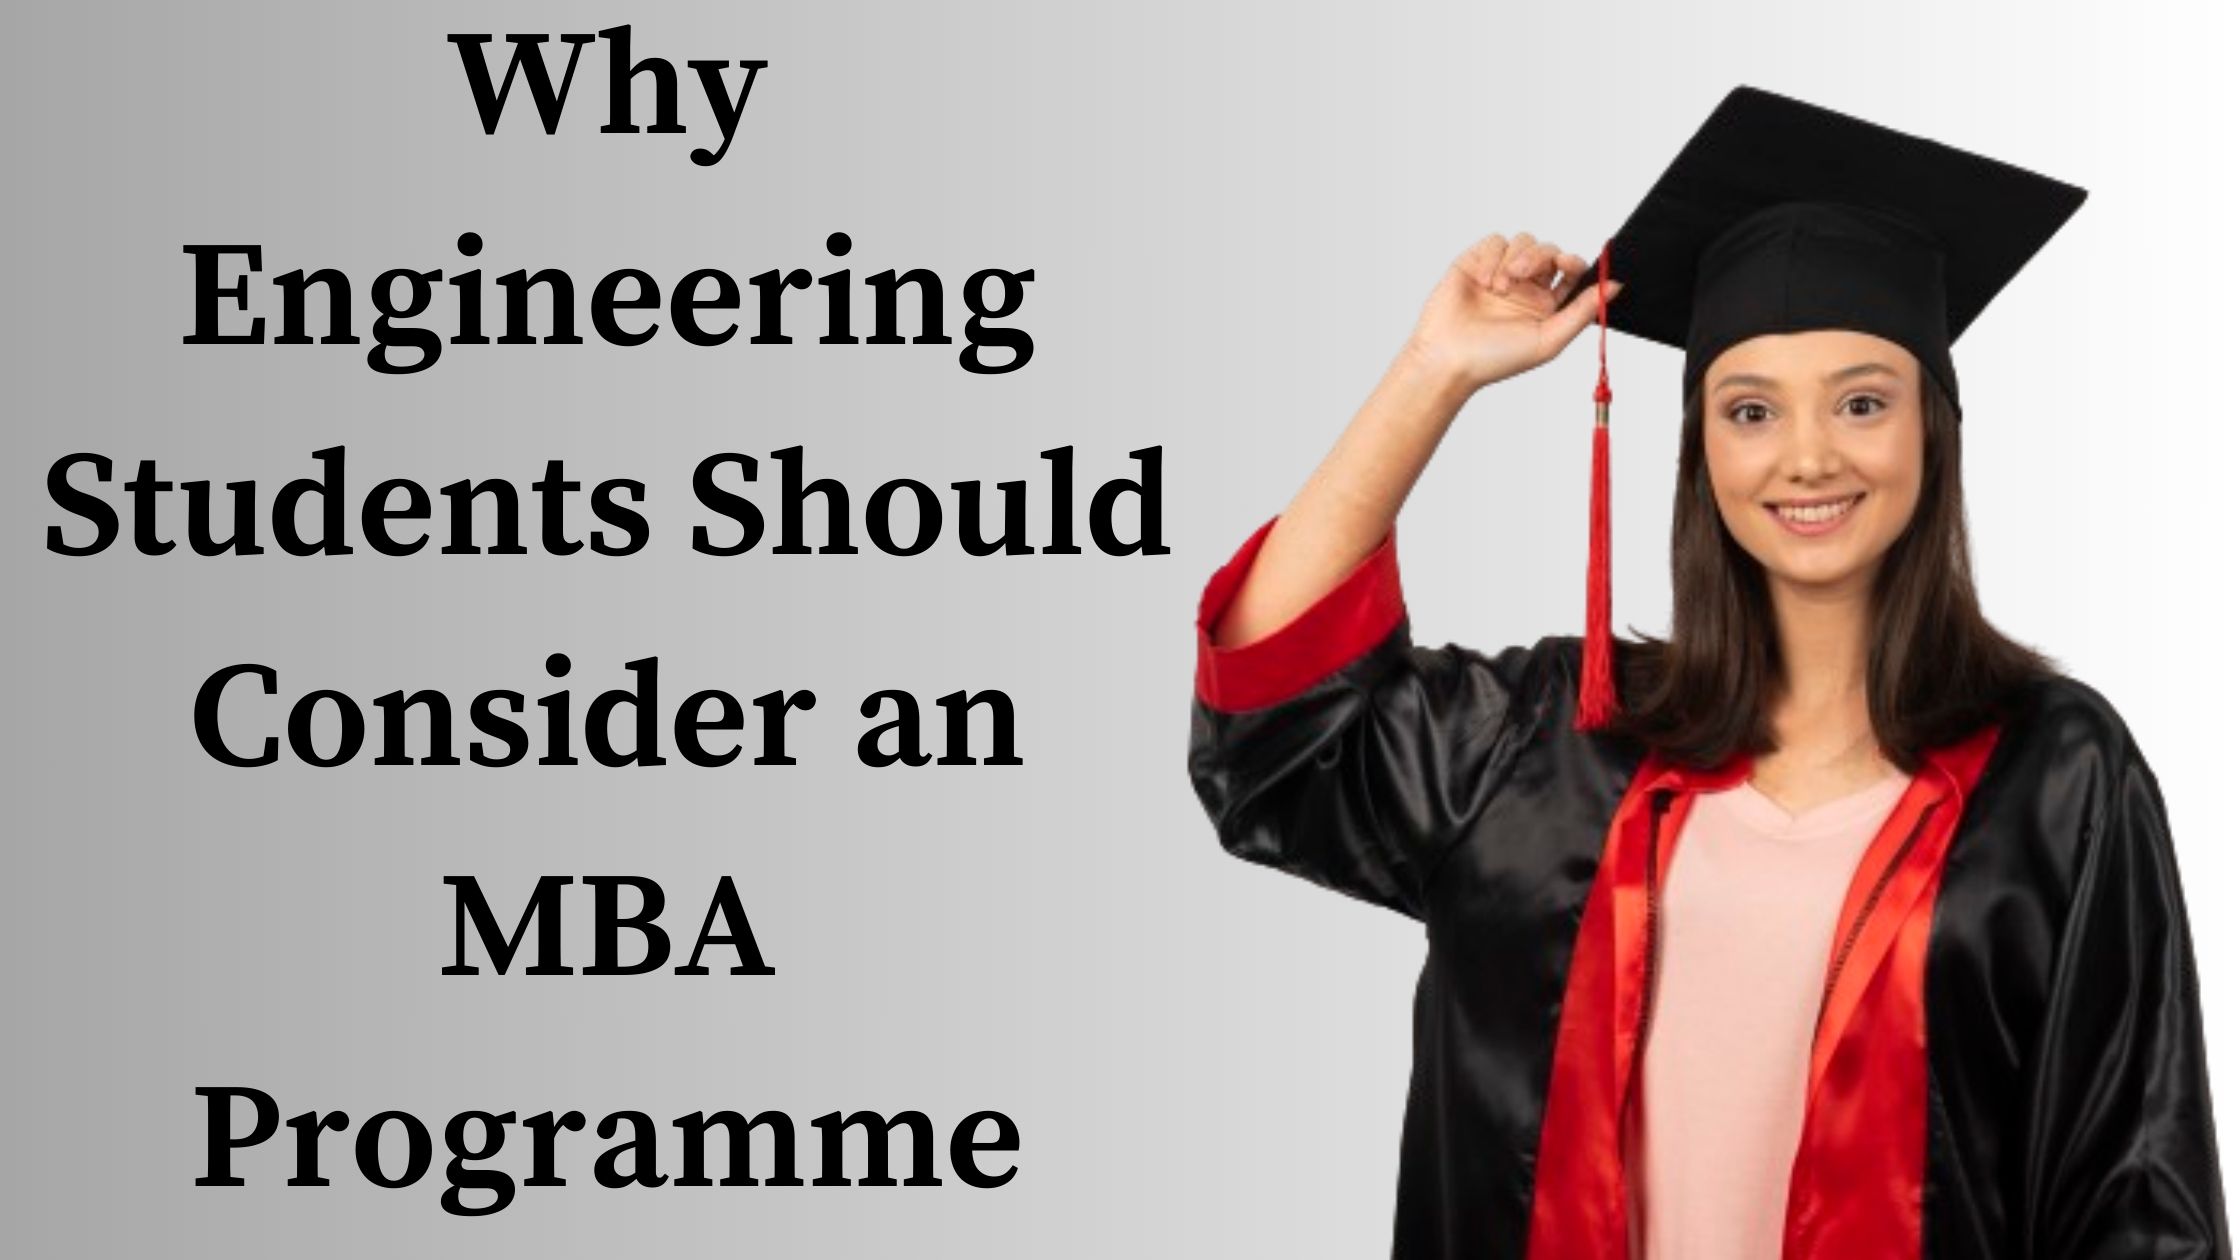 Why Engineering Students Should Consider an MBA Programme